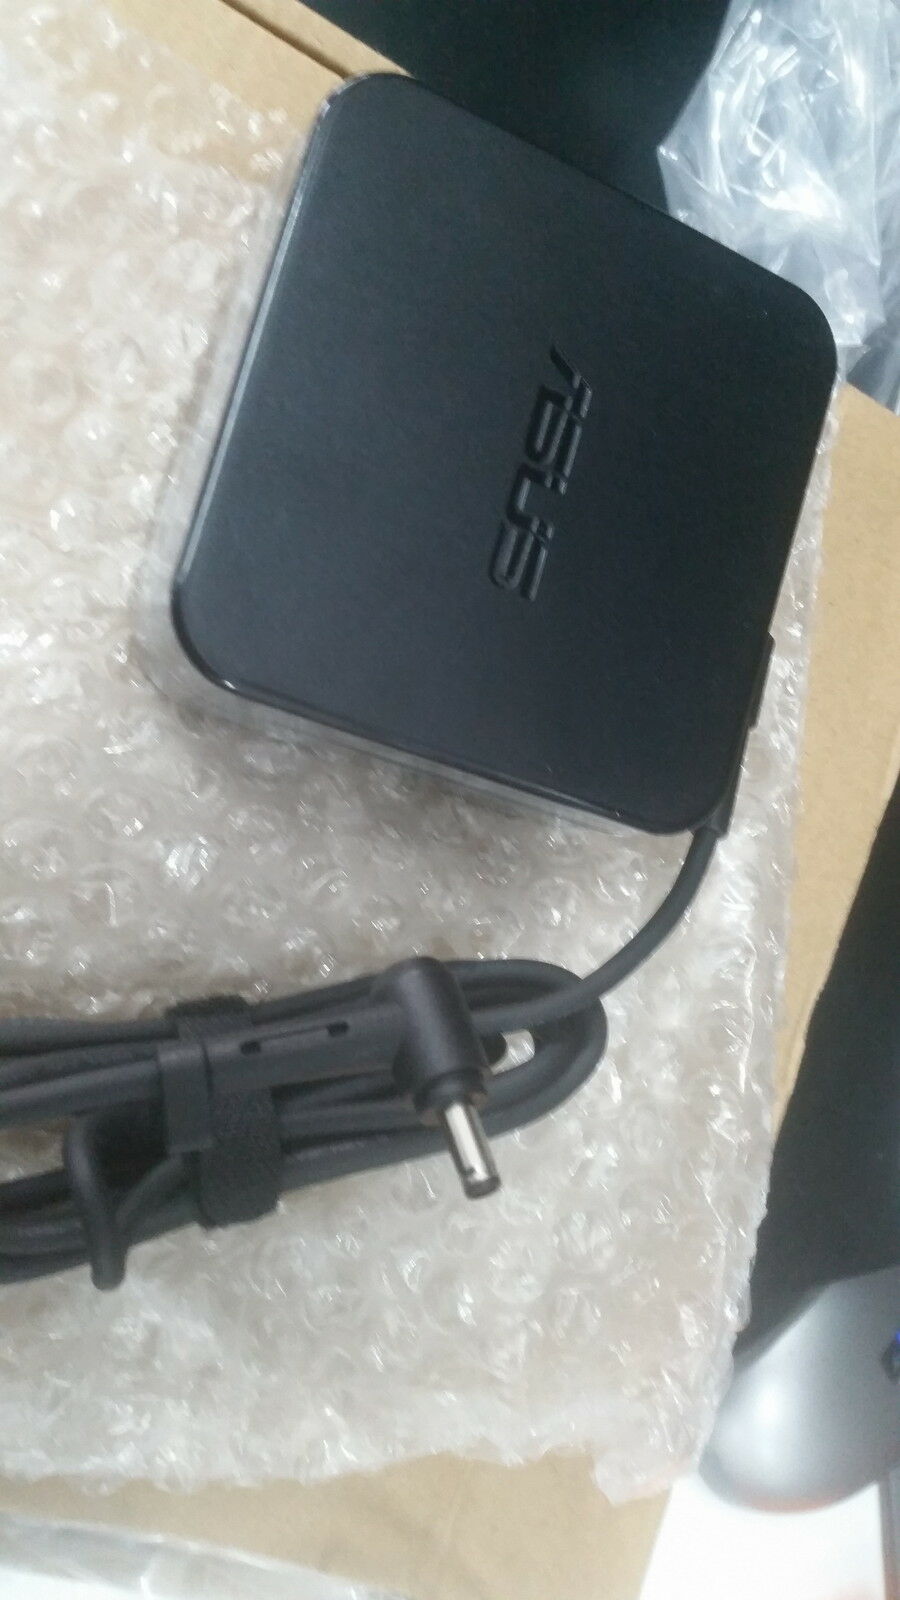 ASUS  19V 4.74A  SQUARE Charger Original 4.5*3.0mm with Central Pin